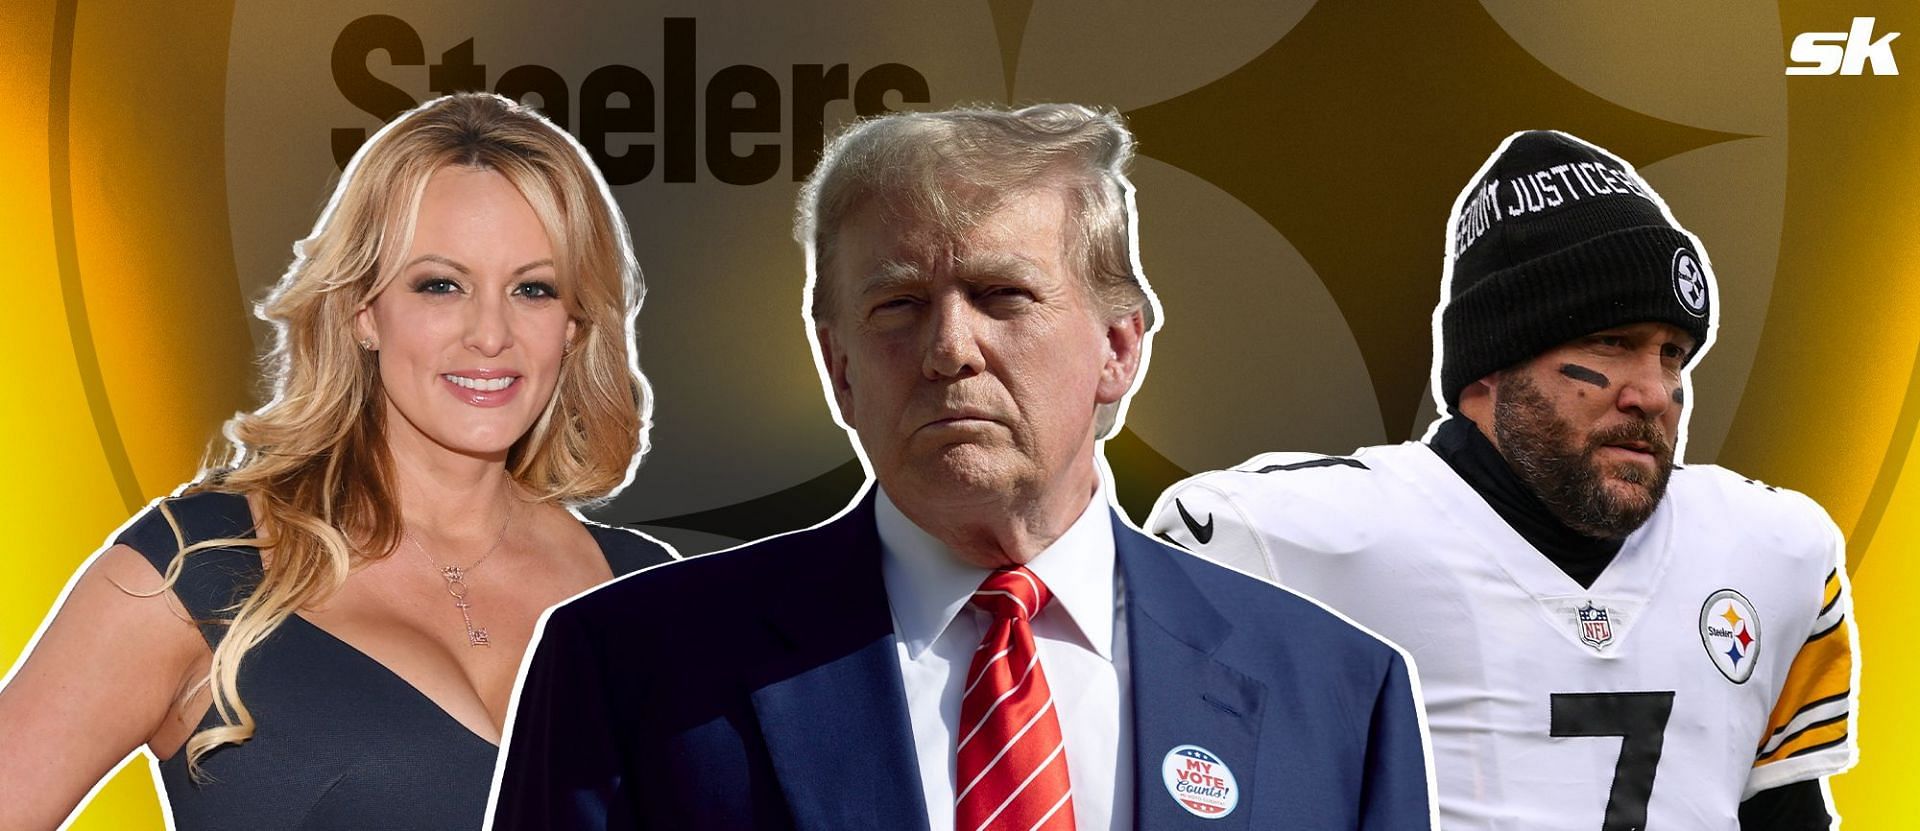 Stormy Daniels claims Ben Roethlisberger let her try on Super Bowl ring 